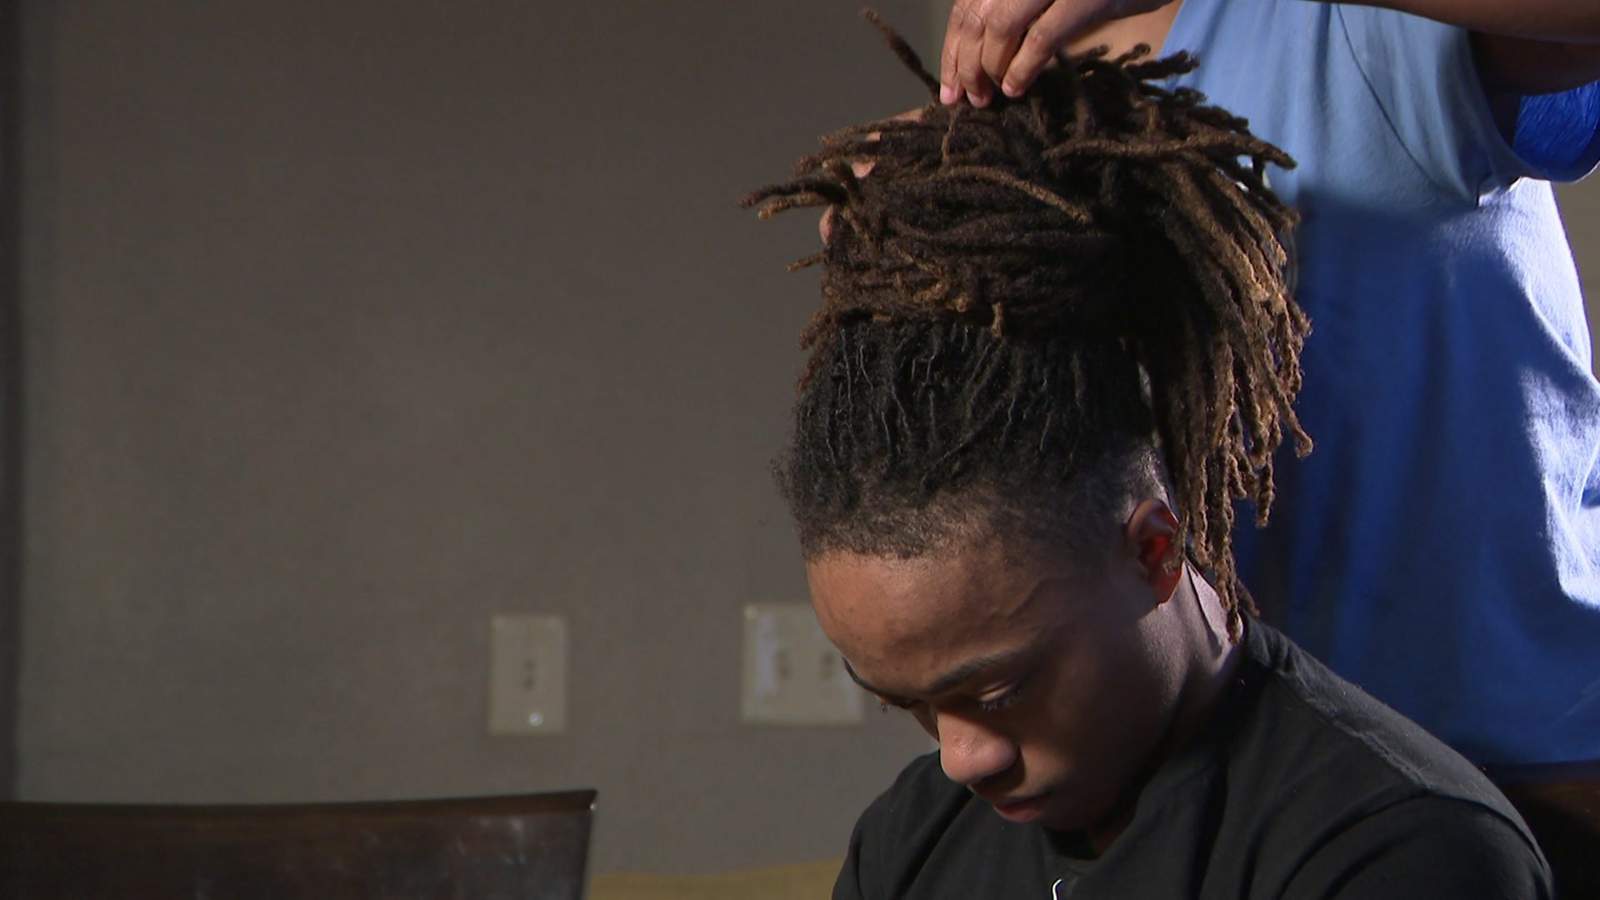 Dreadlocks length controversy heats up at the Barbers Hill board meeting